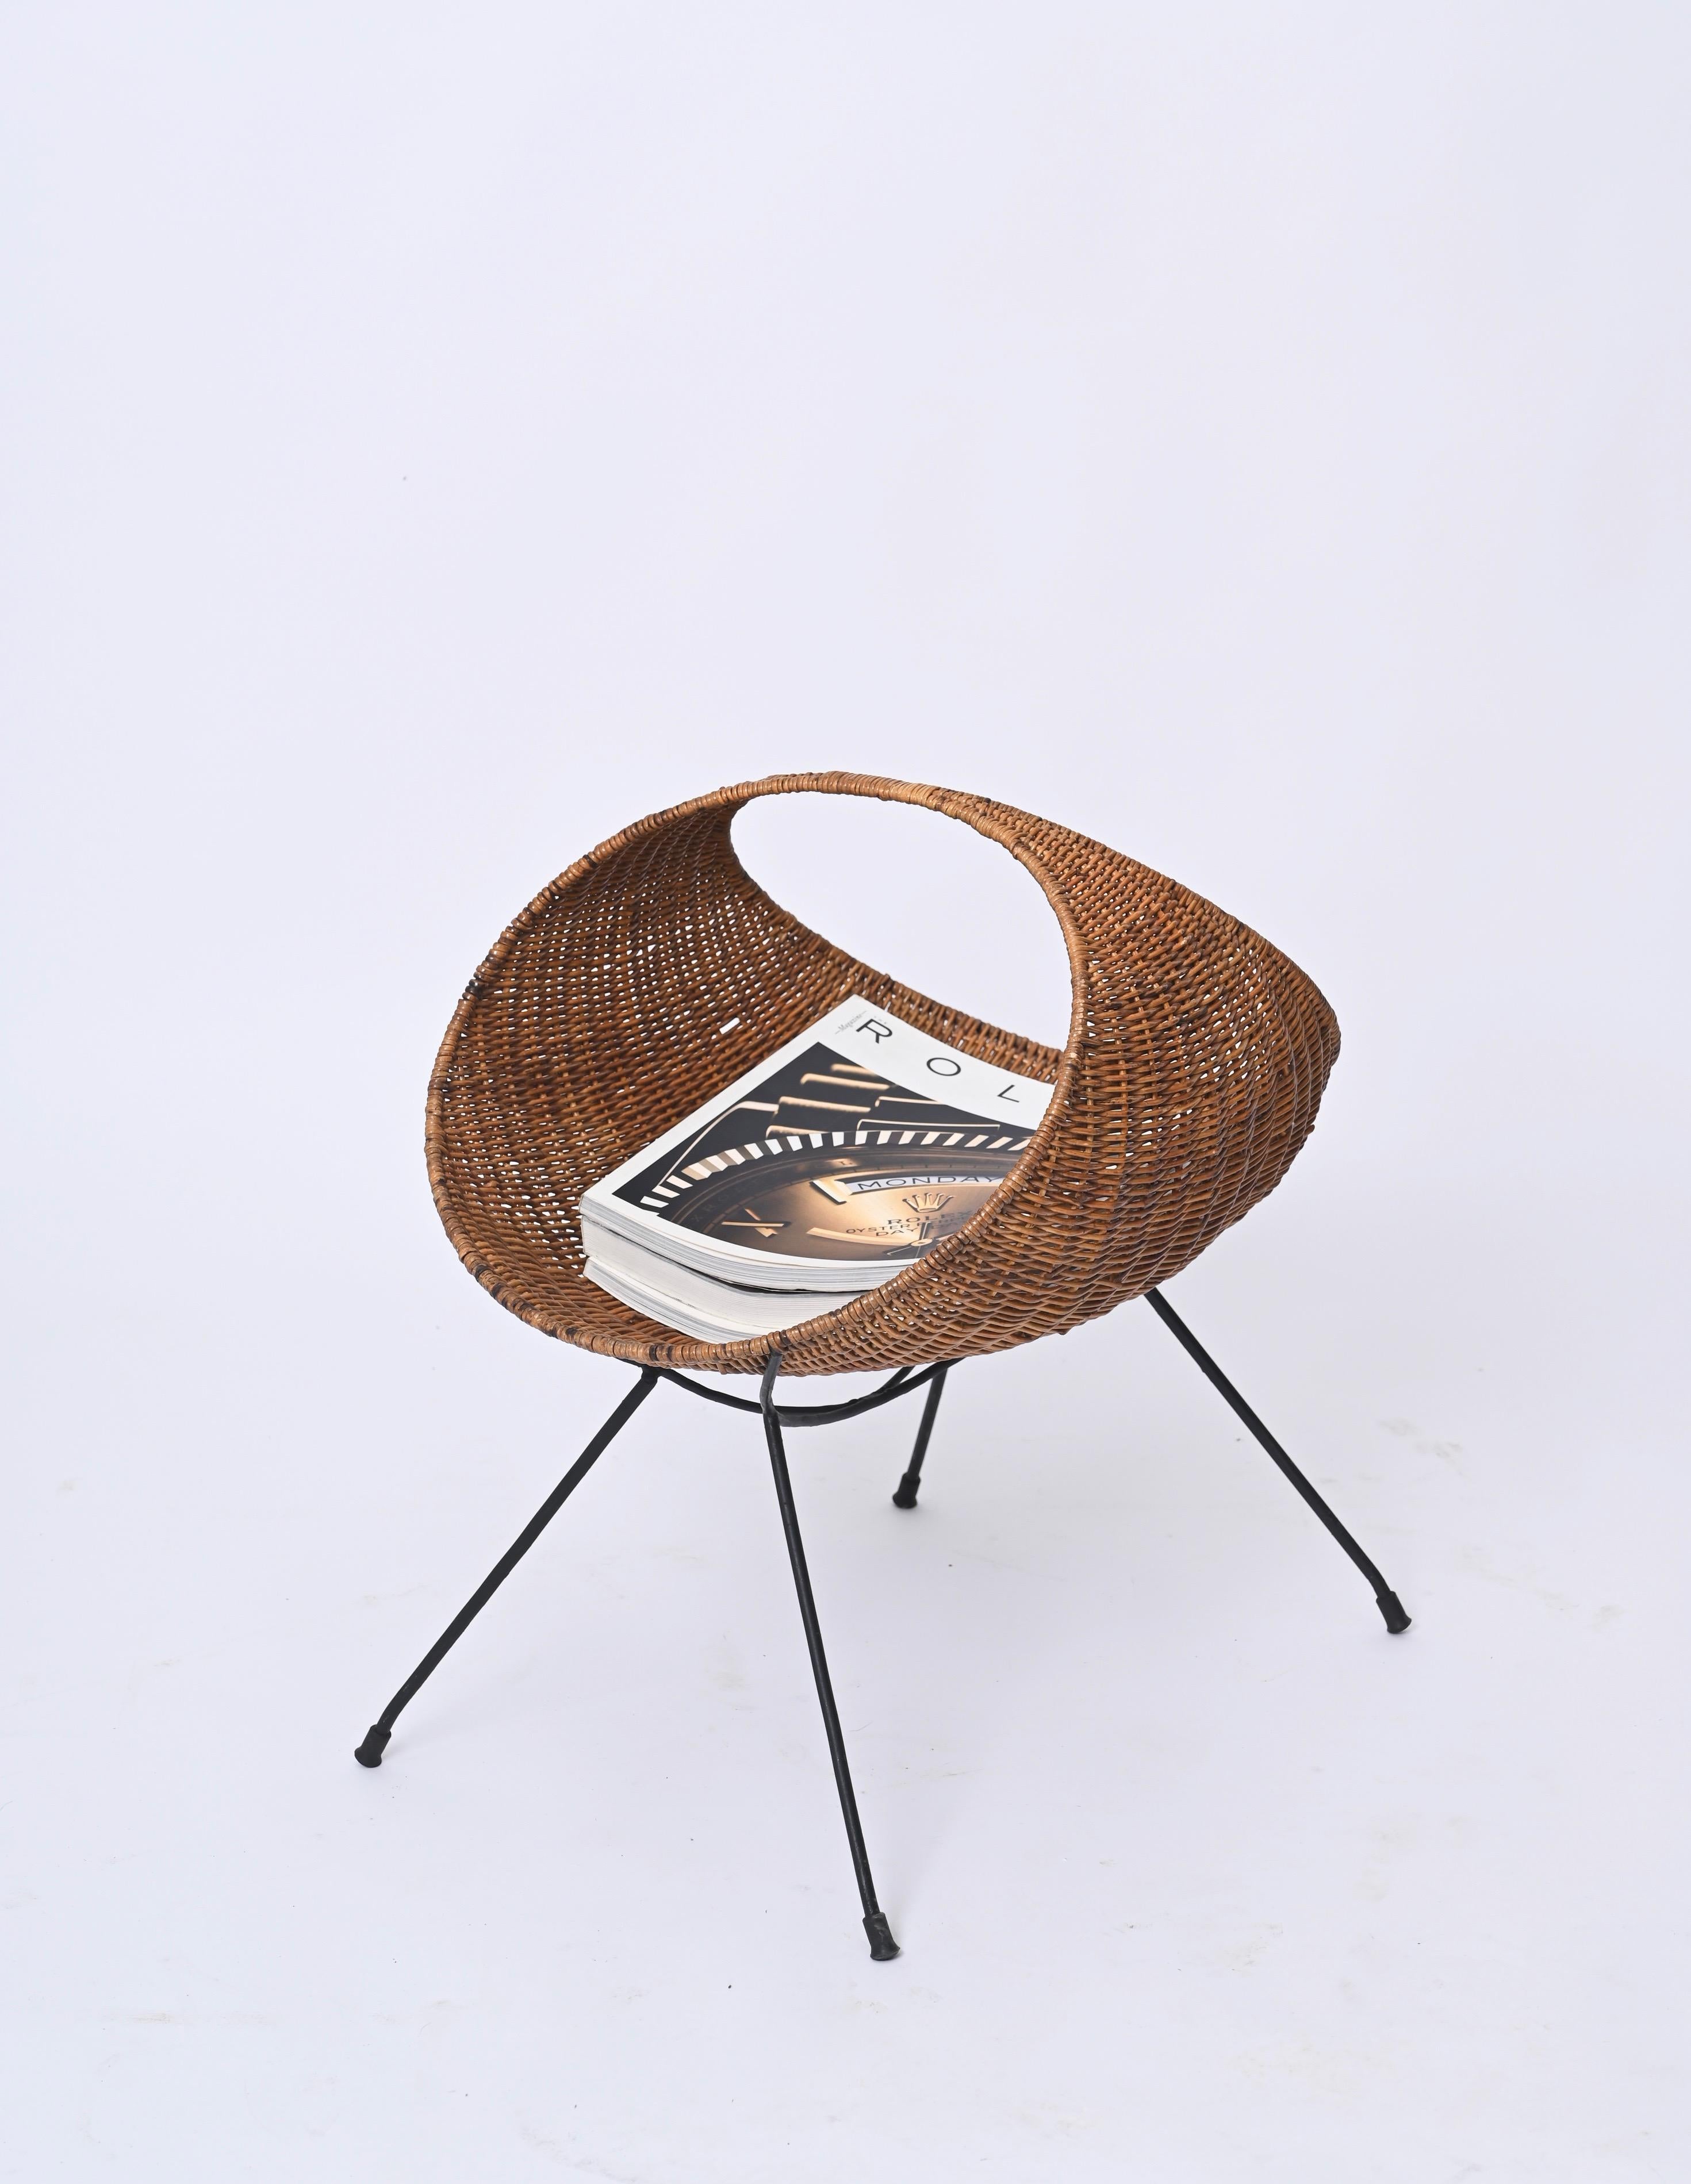 Campo & Graffi Magazine Rack in Wicker and Black Enameled Iron, Italy 1950s For Sale 6